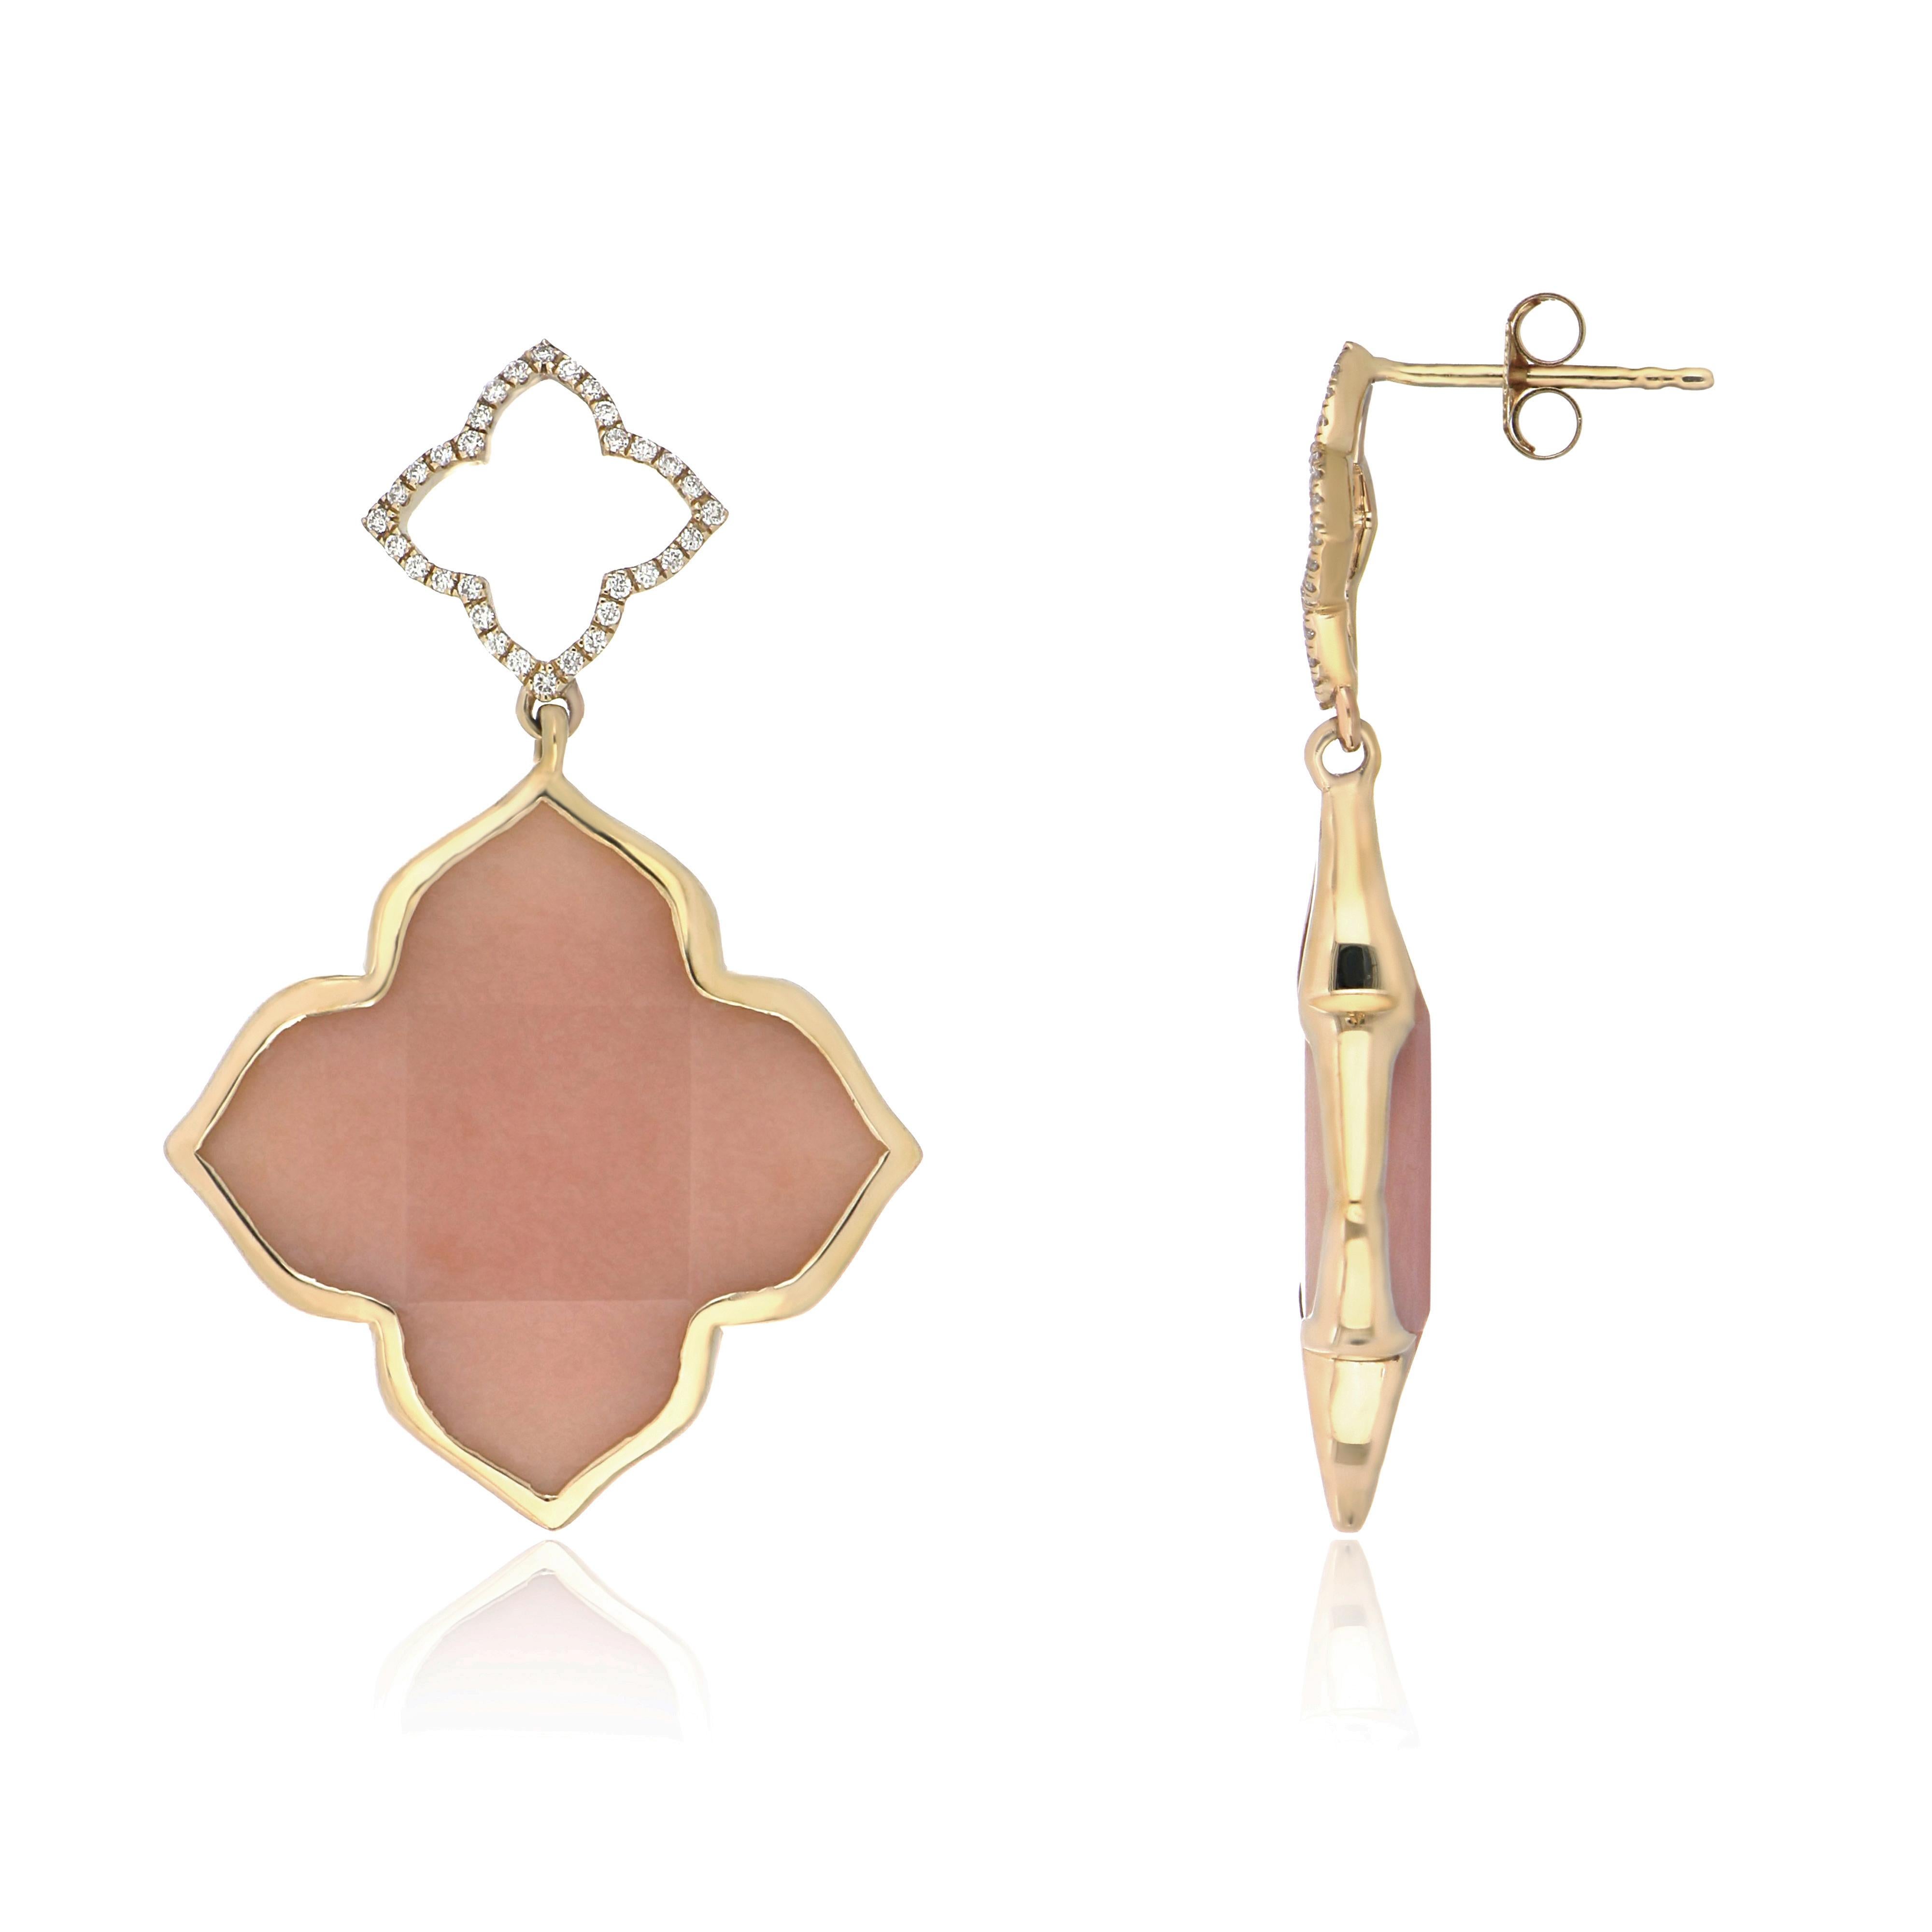 Contemporary 19.63Cts Pink Opal and Diamond Earrings in 14Karat Yellow Gold Hand-made Earring